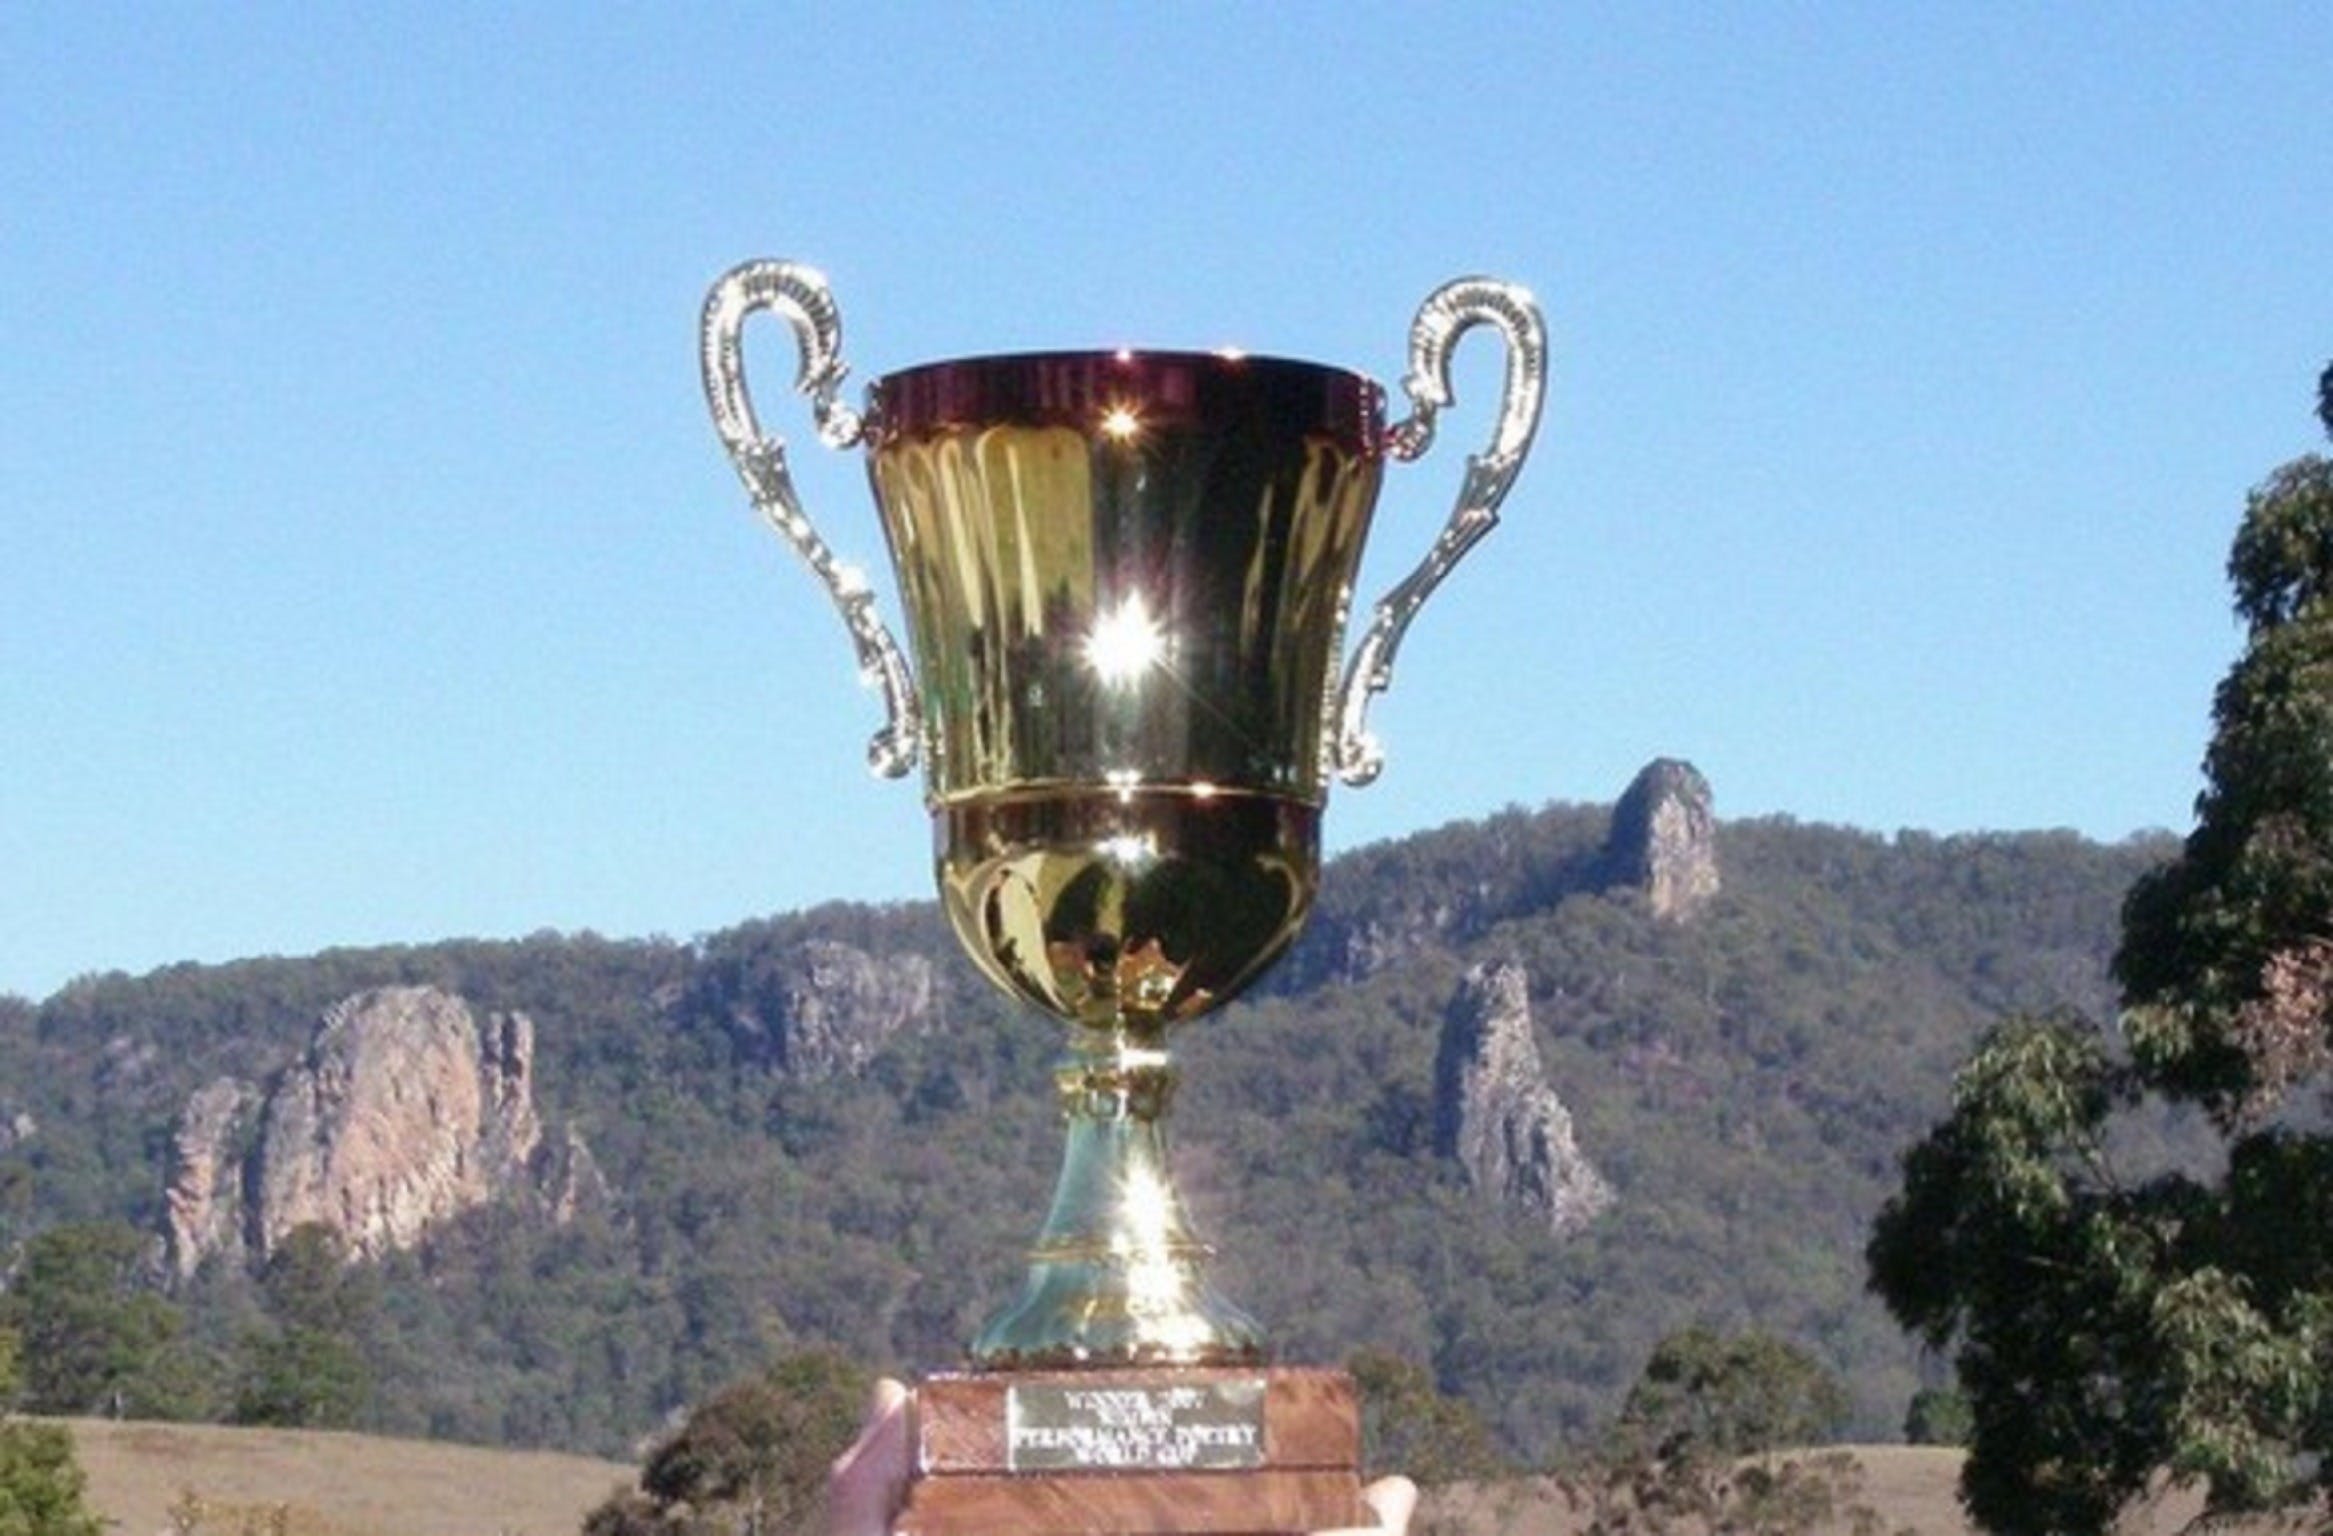 Nimbin Poetry World Cup - Accommodation Guide